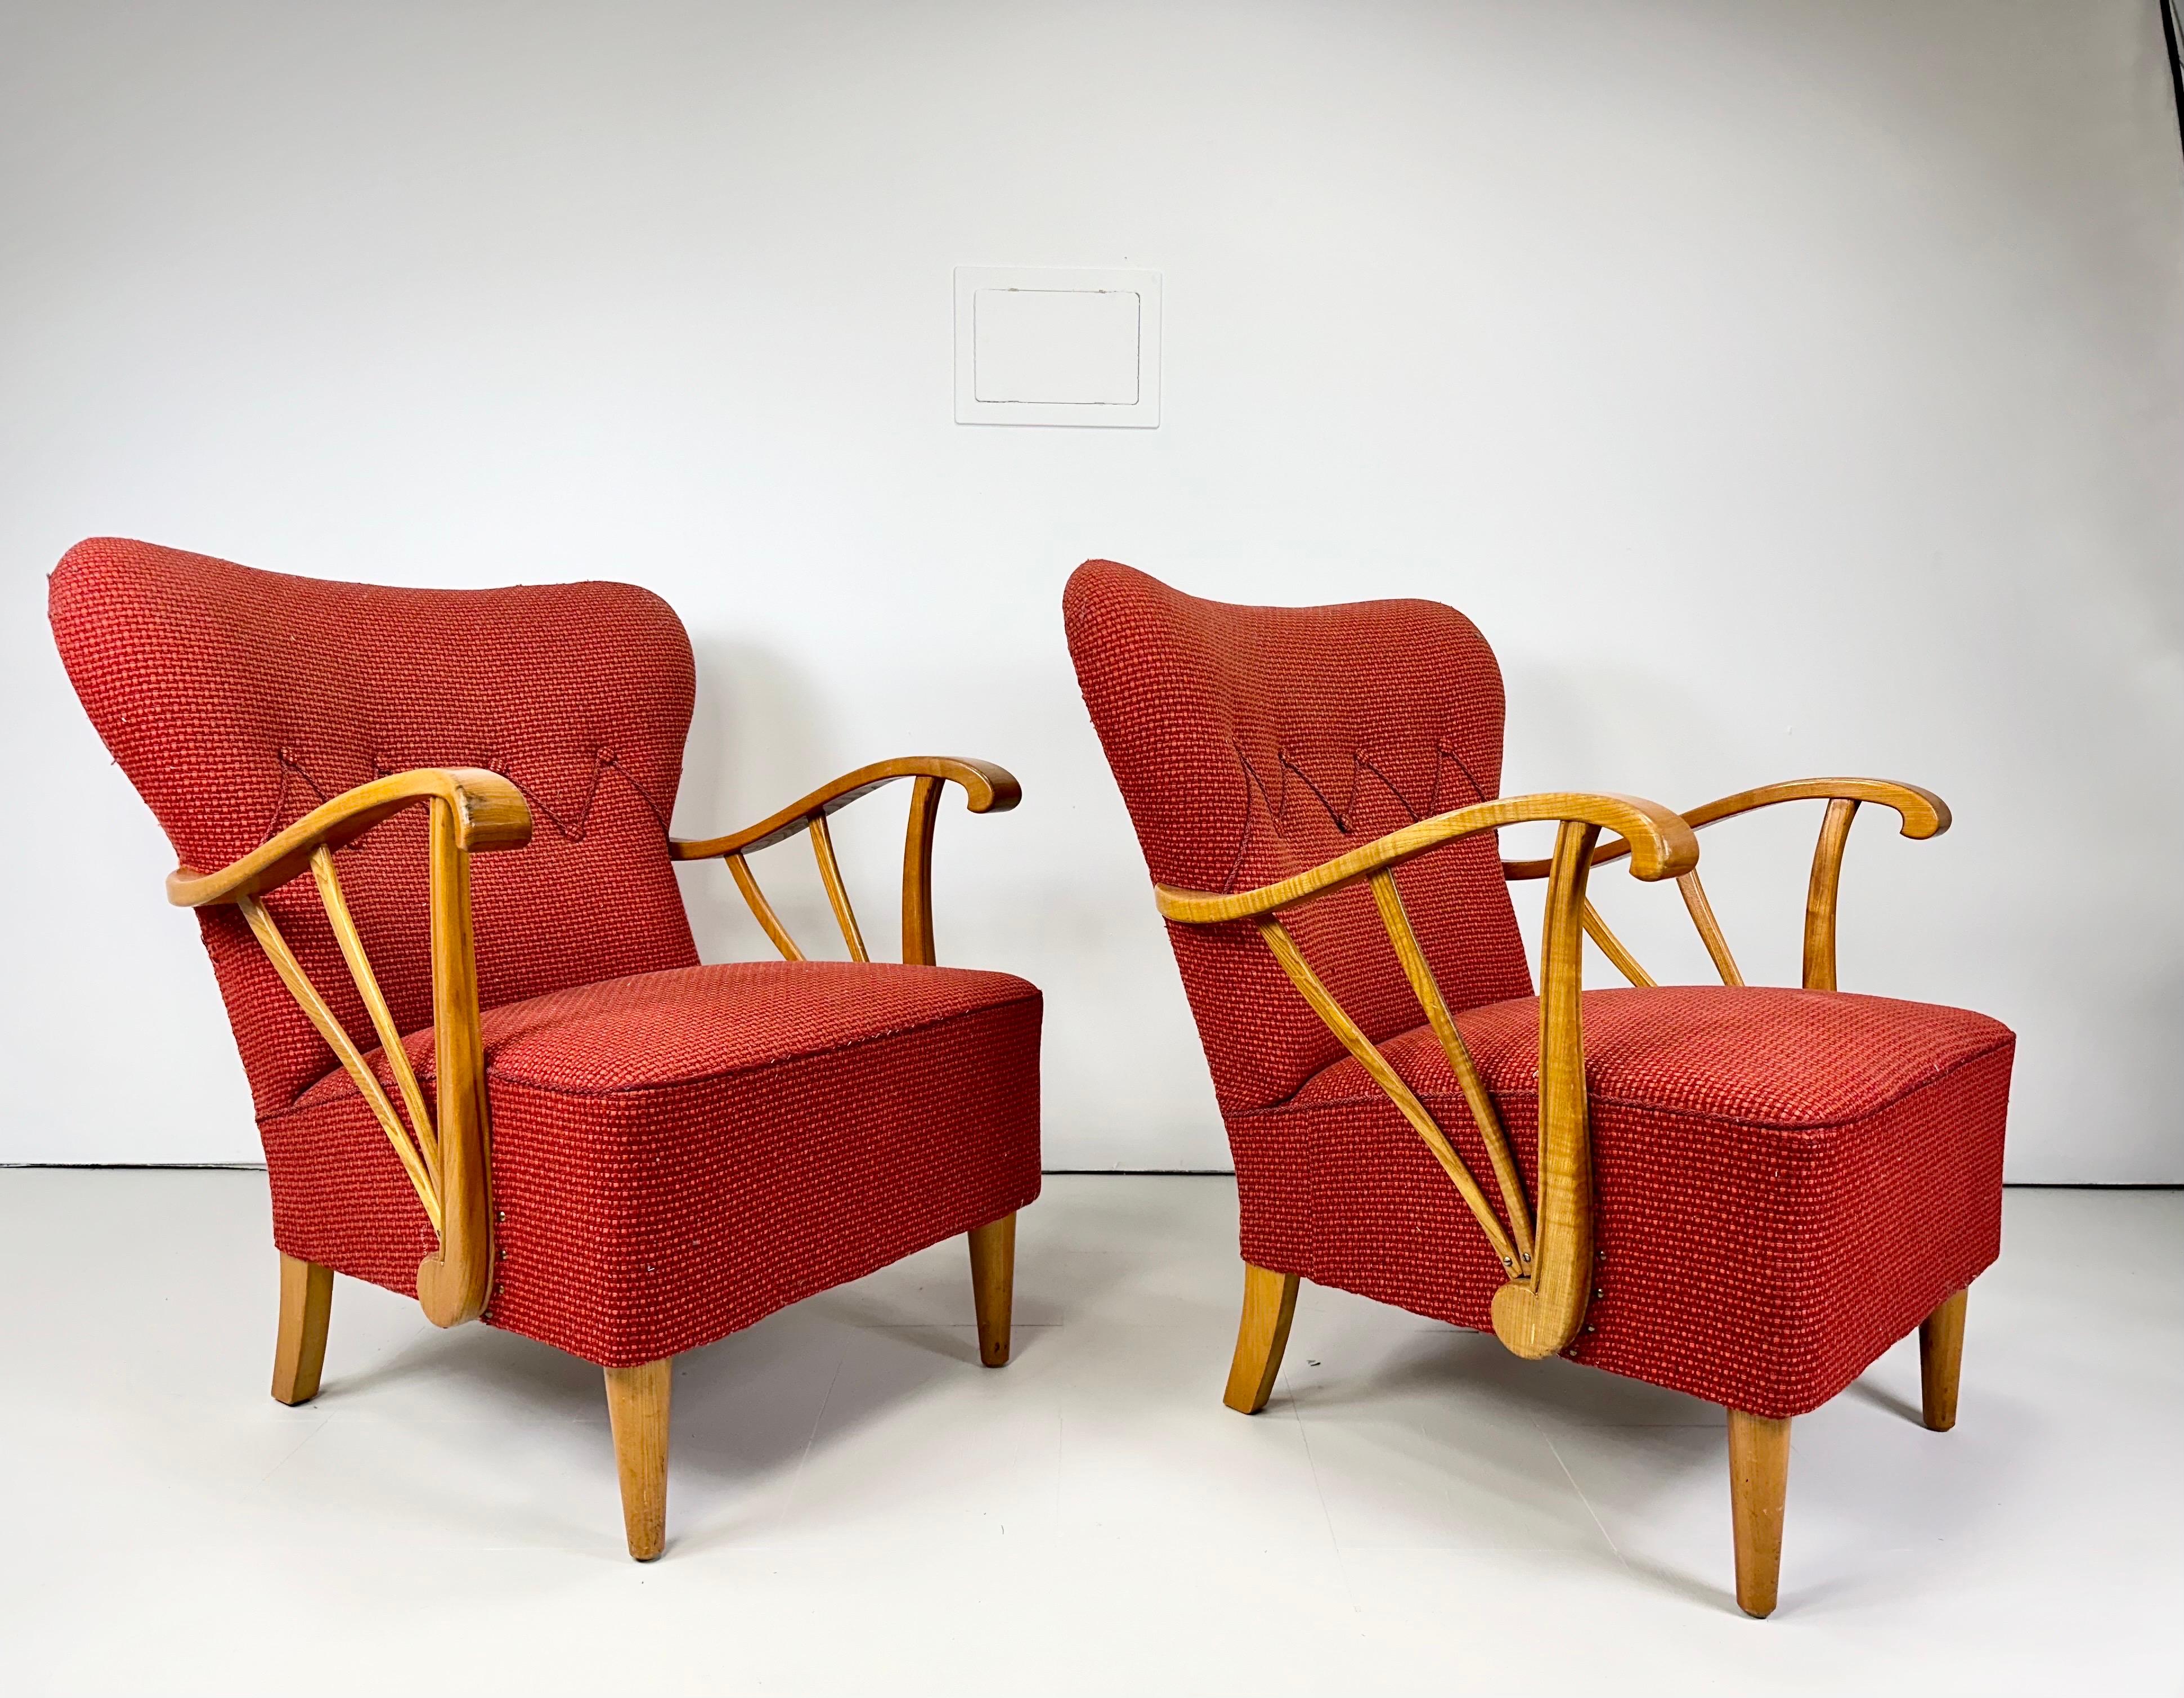 Pair of 1940’s Swedish Lounge Chairs. Vintage Upholstery. Sculpted Beech wood frames.

Delivery to NYC area $375